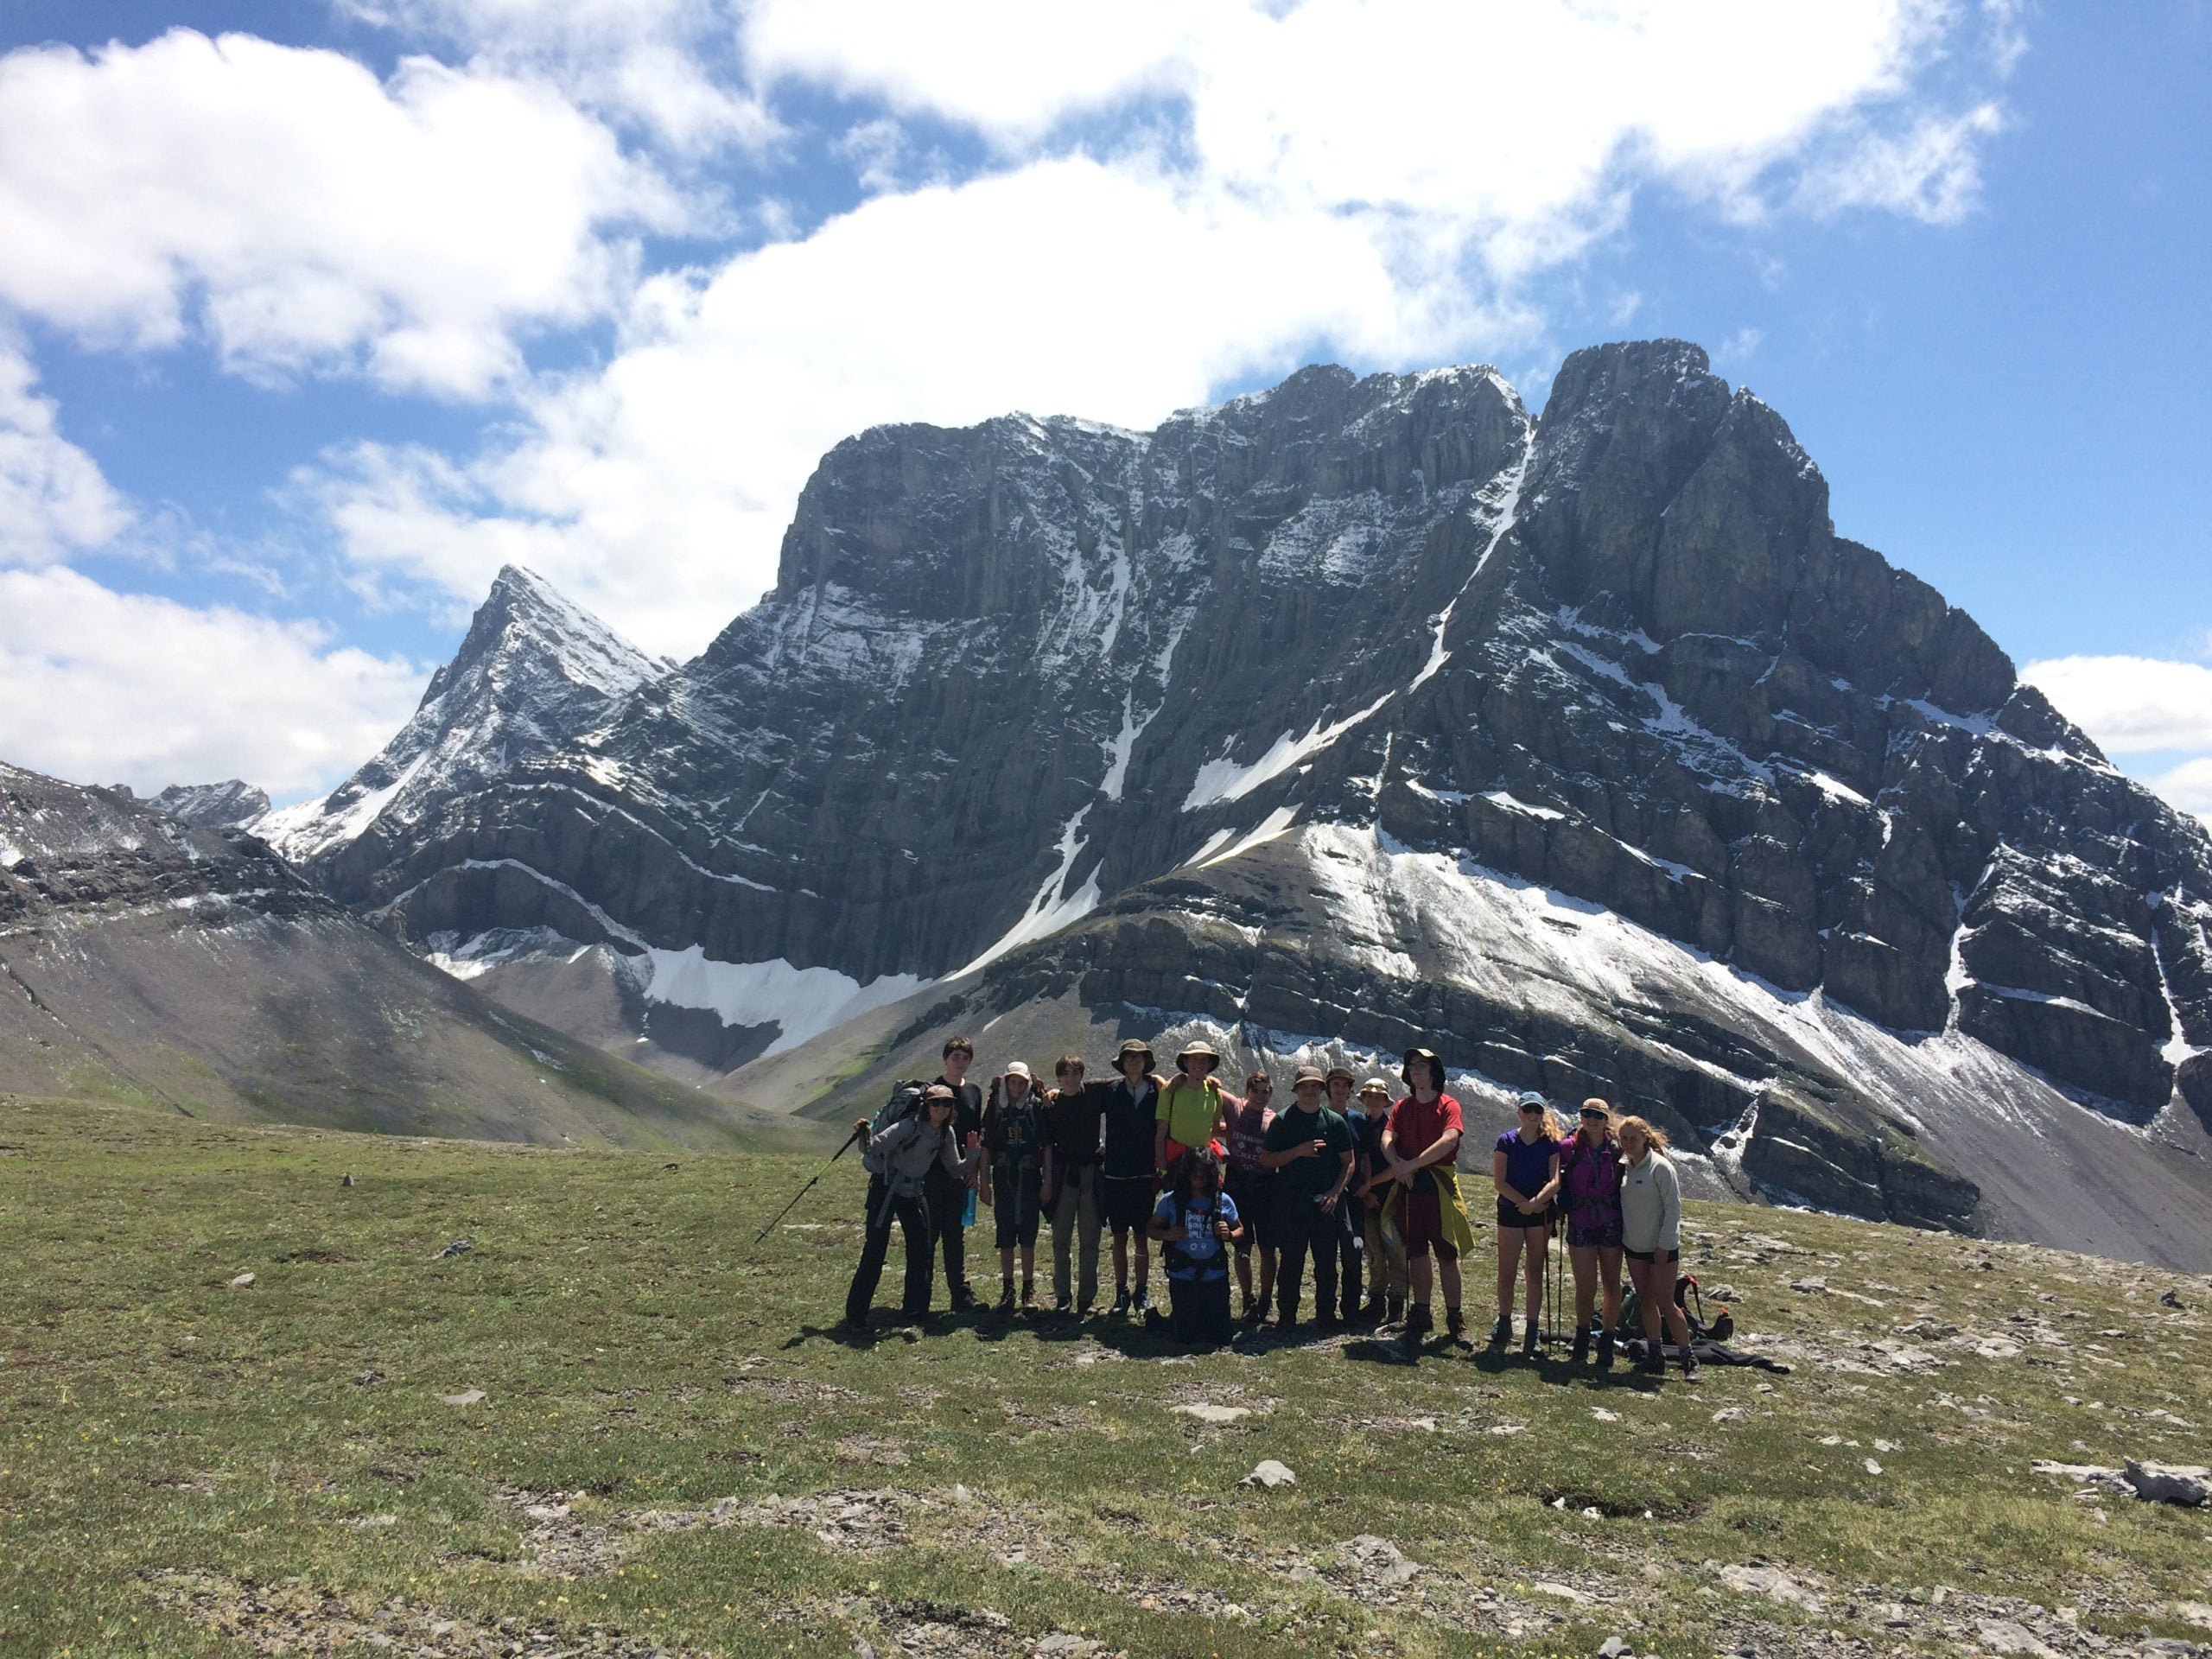 Kootenay youth Go Wild! into Height of the Rockies Provincial Park